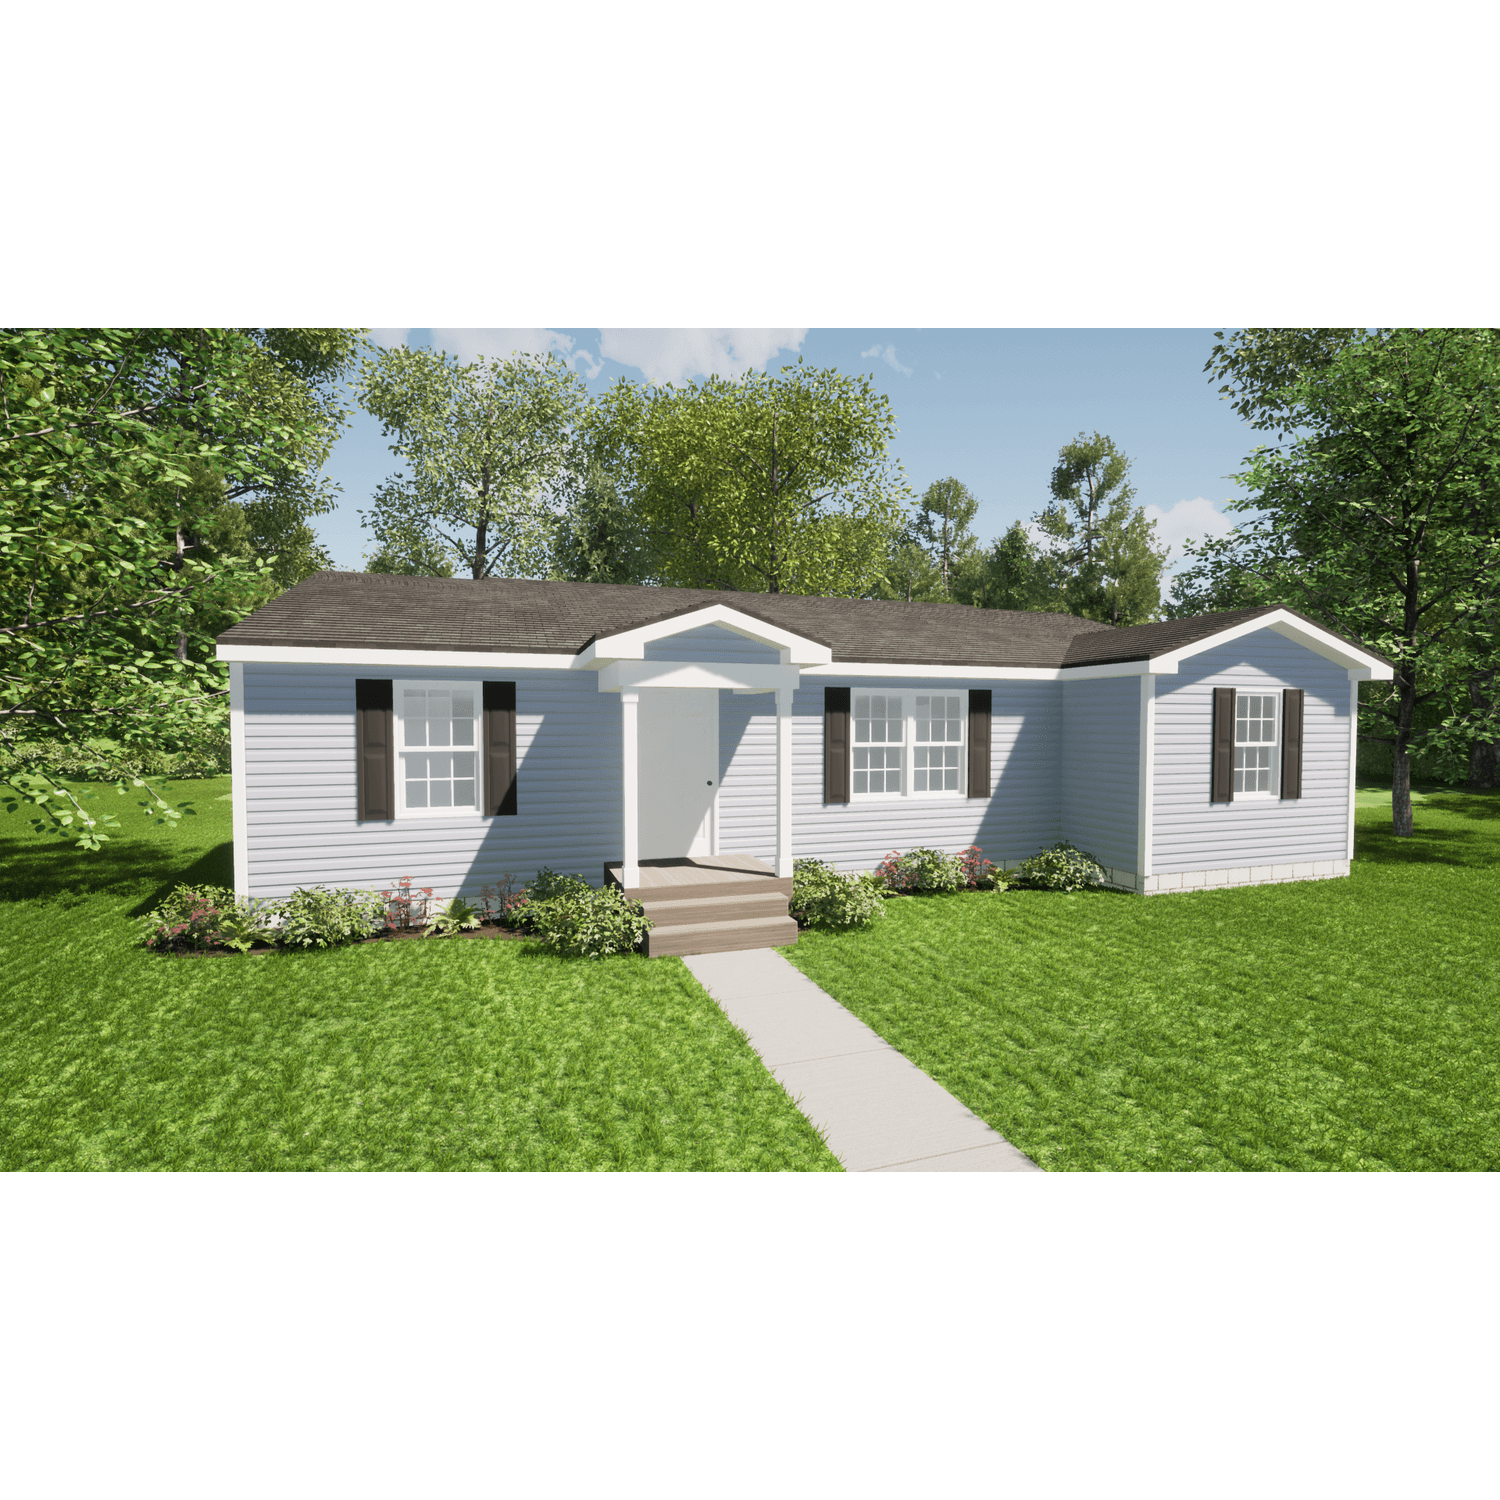 1. Valuebuild Homes - Rocky Mount - Build On Your Lot